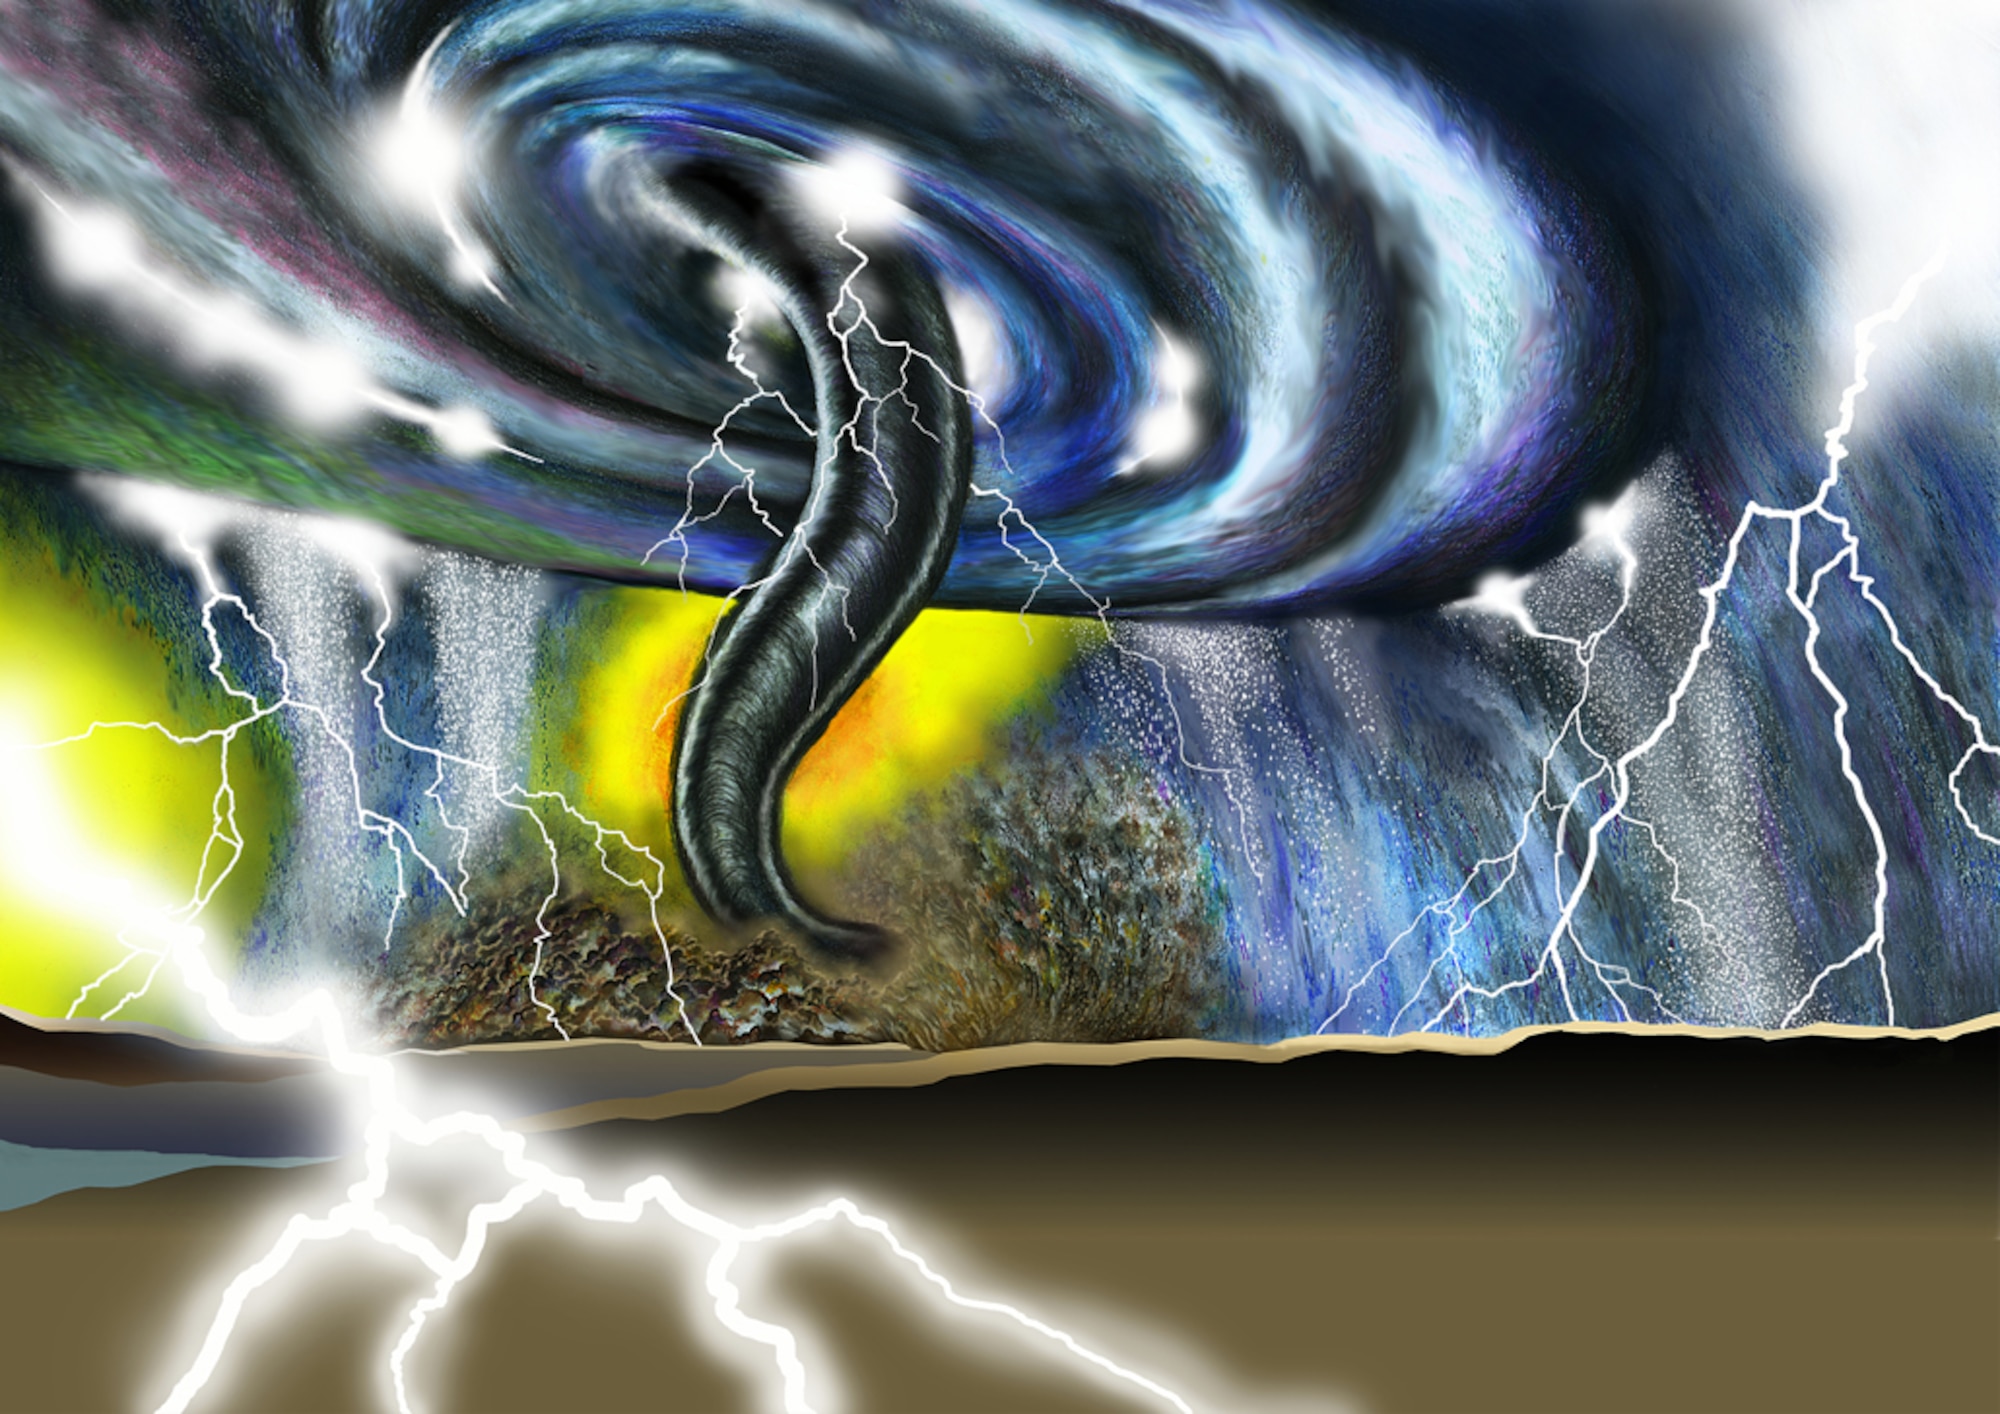 Tornadoes can occur almost anywhere in the world, but the United States is the country with the highest frequency of tornadoes. (Illustration by Sammie W. King)